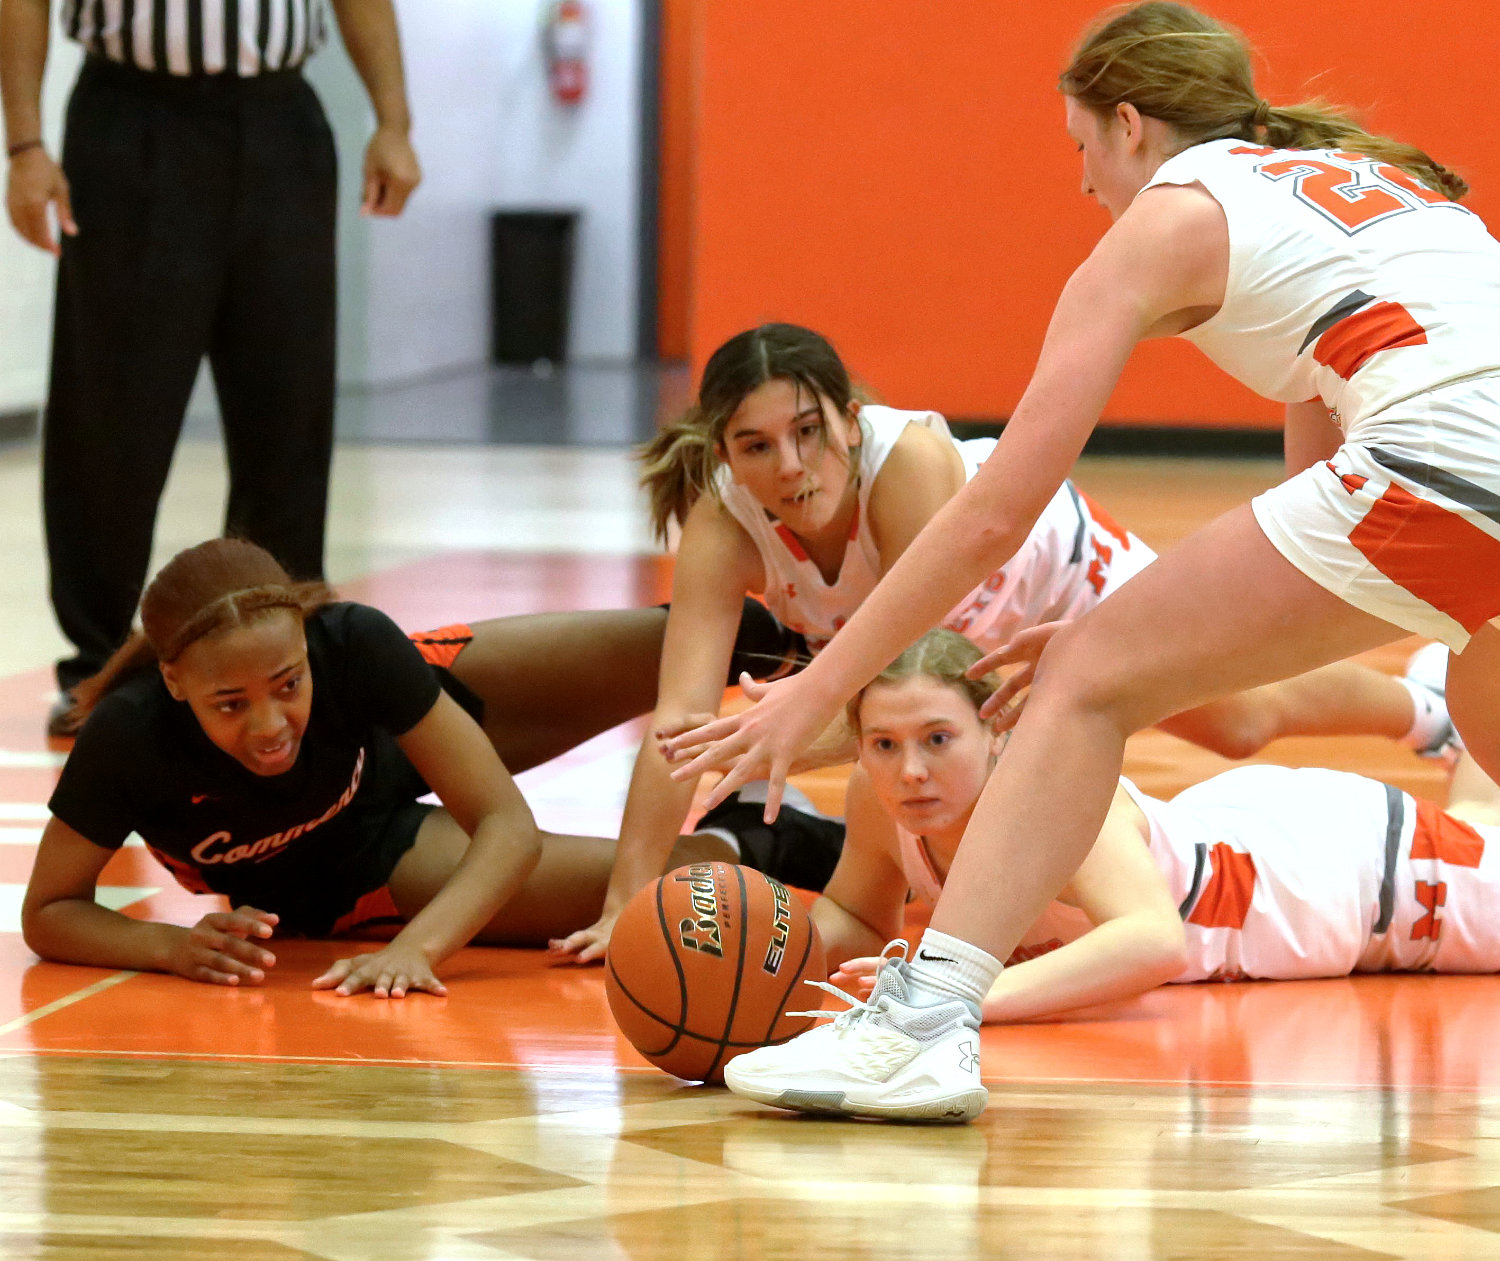 Three Lady Jackets, from left, Carmen Carrasco, Mylee Fischer and Macy Fischer, hustling for a loose ball against one Lady Tiger pretty much sums up Mineola’s signature win last Tuesday against Commerce.